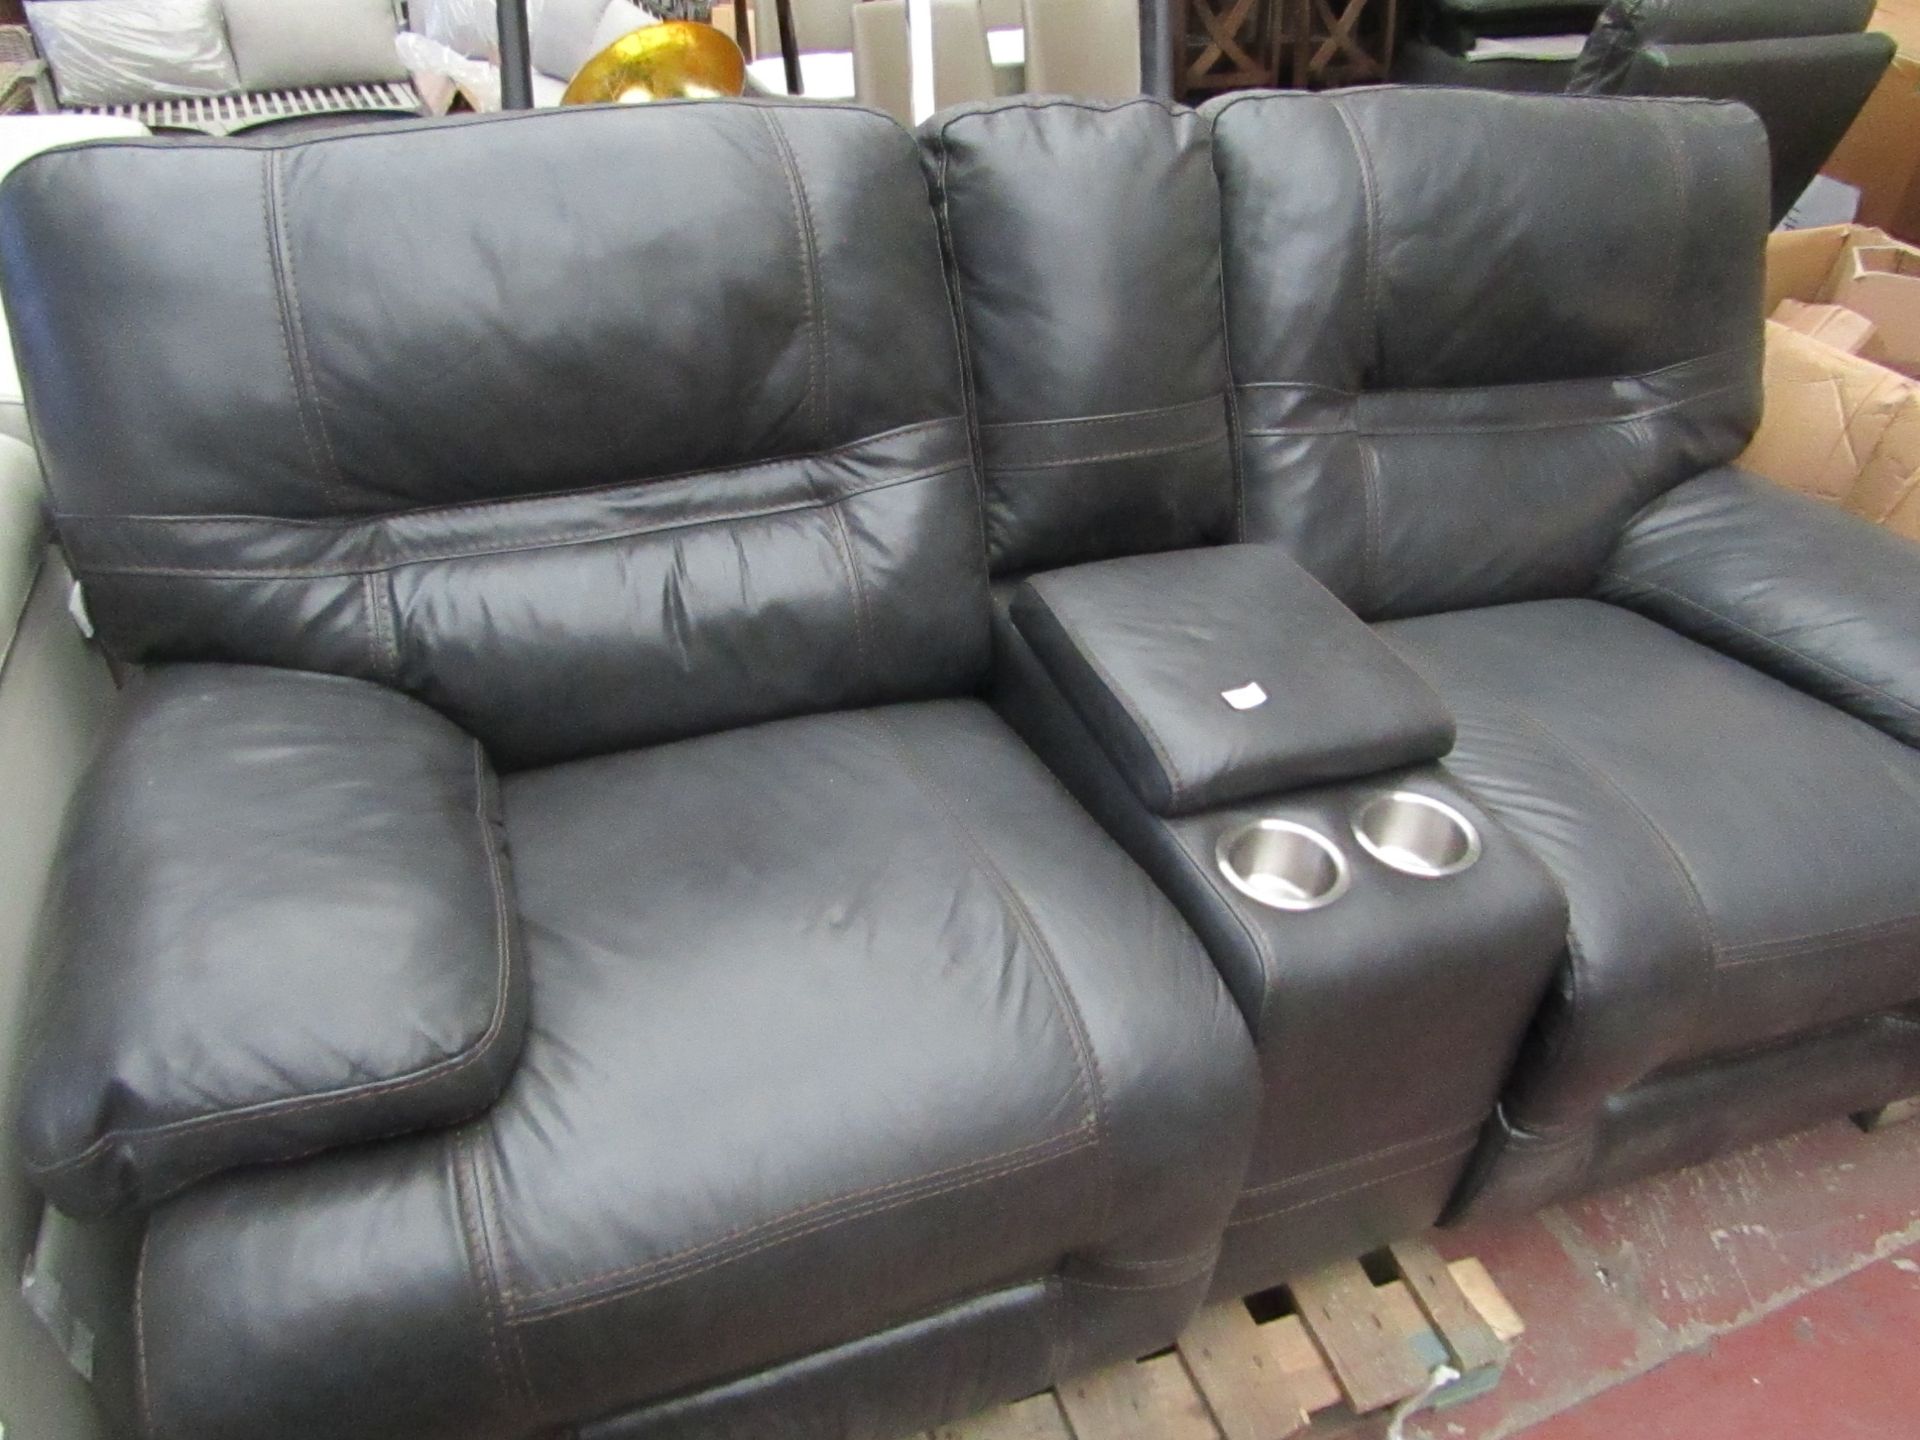 Costco 2 seater elecric reclining cinema sofa with cup holders, unchecked